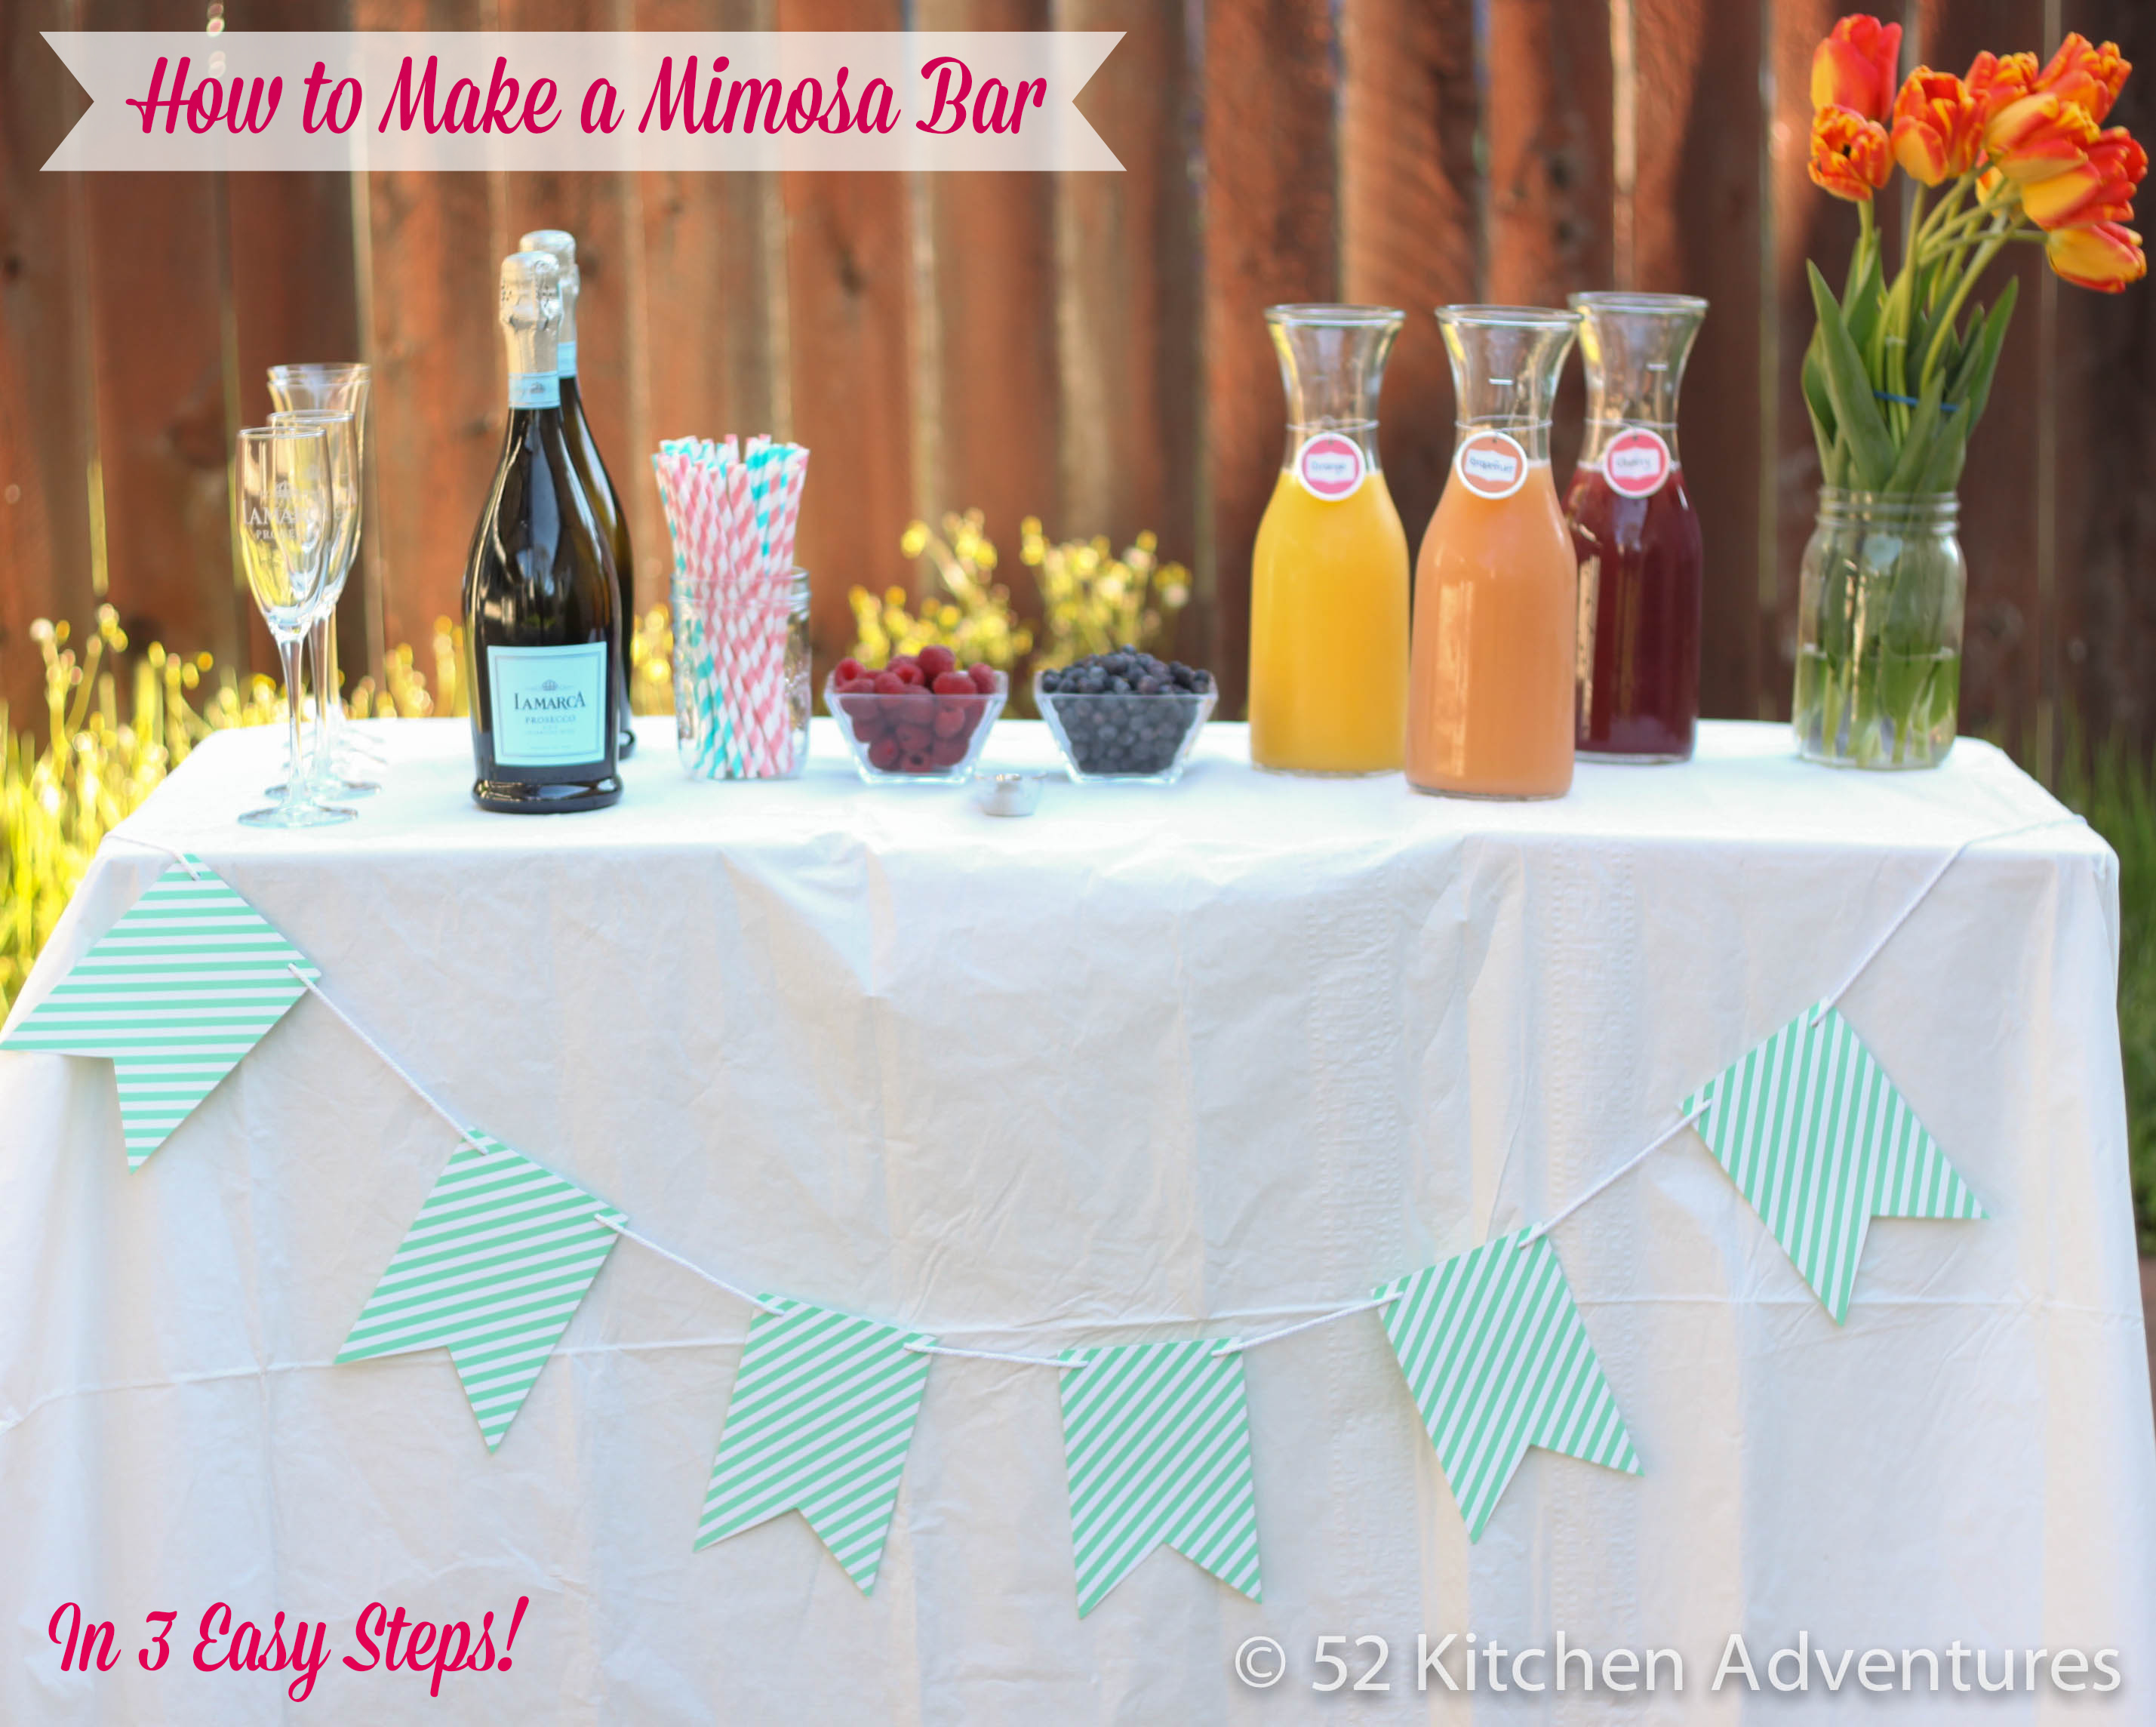 http://www.52kitchenadventures.com/wp-content/uploads/2014/04/How-to-Make-a-Mimosa-Bar-in-3-Easy-Steps-.jpg